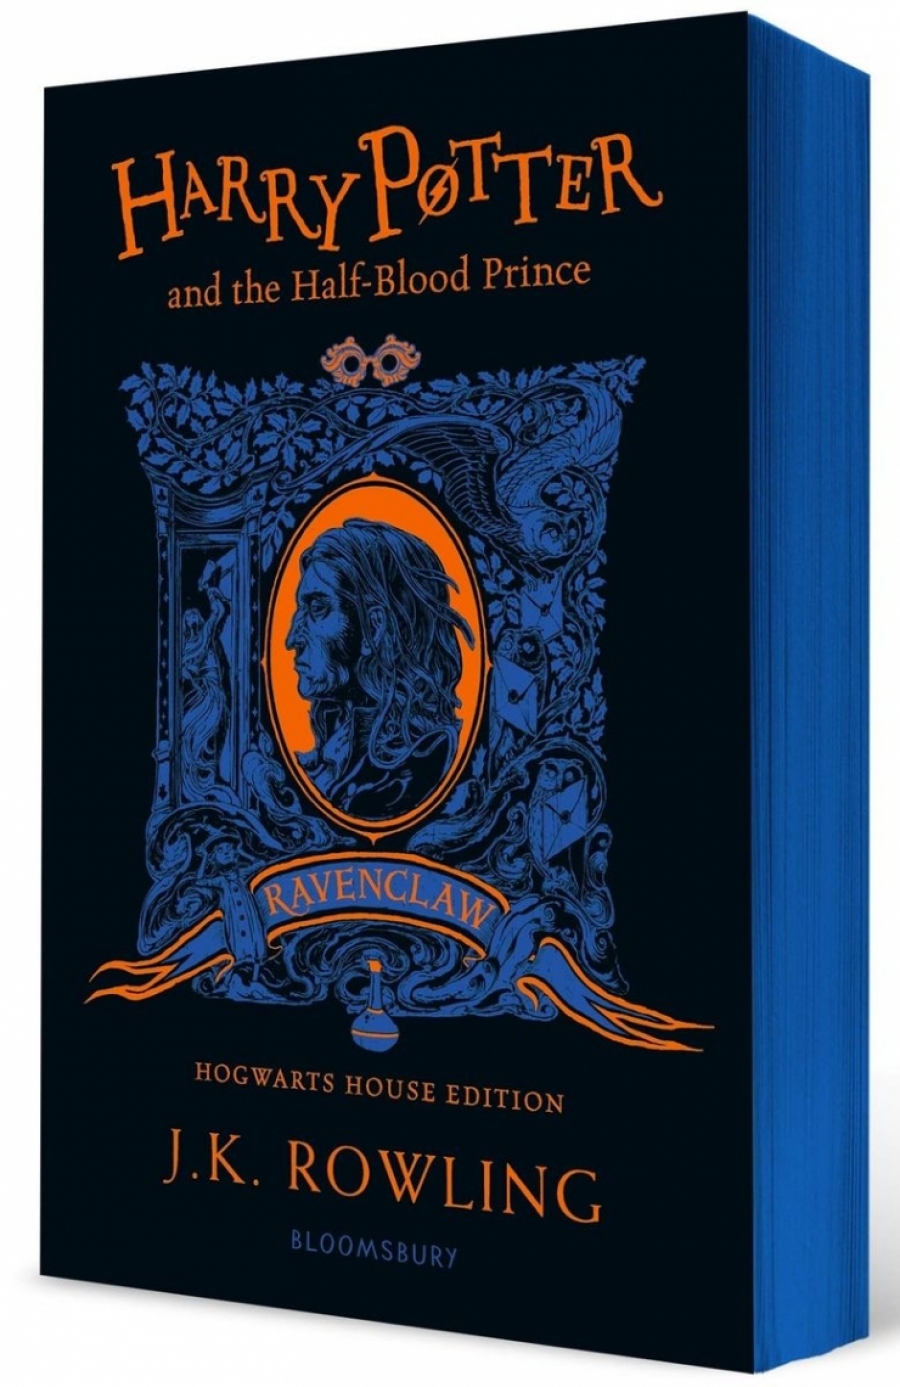 Rowling J.K. Harry potter and the half-blood prince - ravenclaw edition 